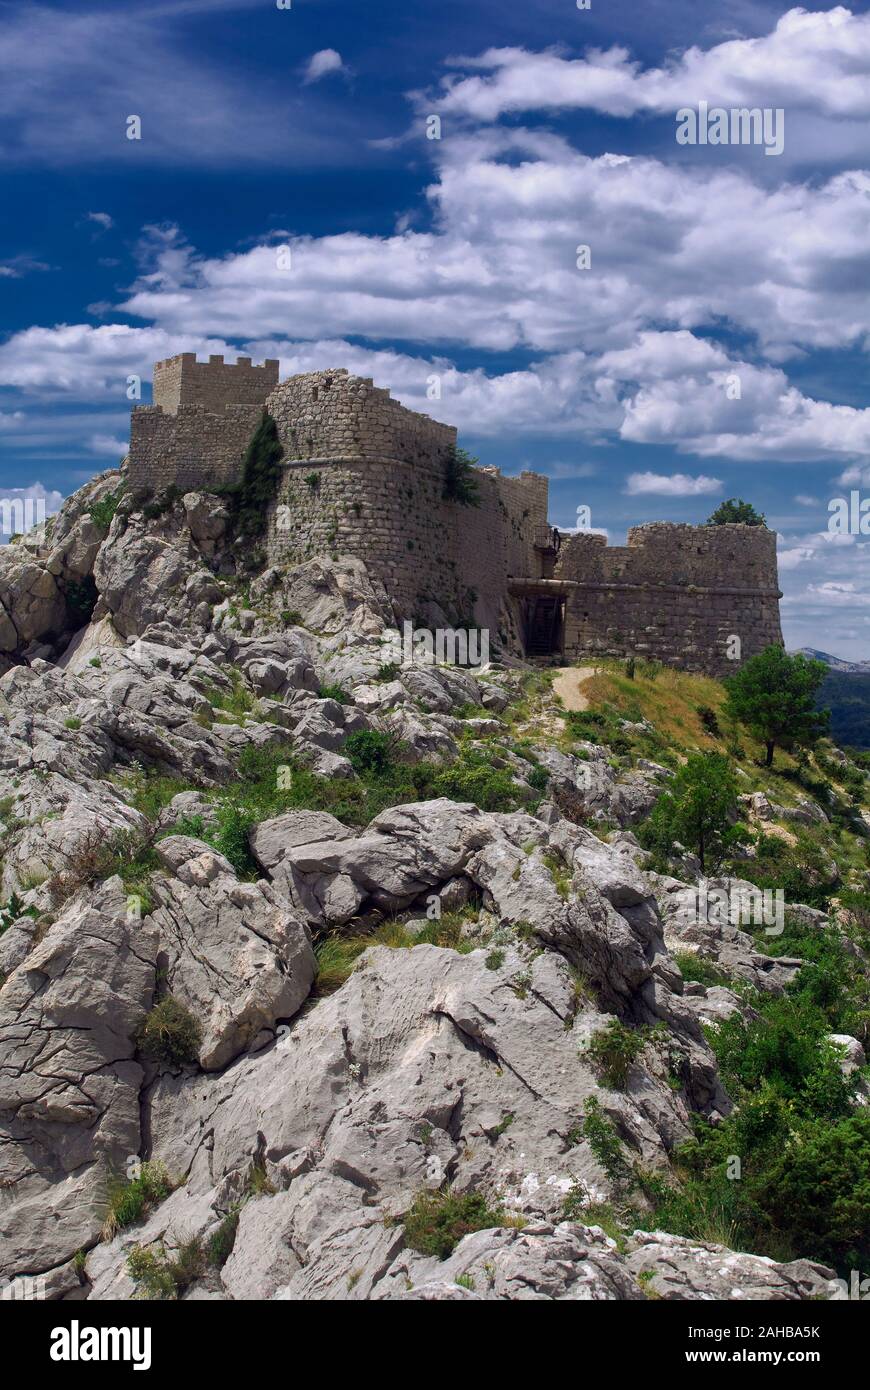 Starigrad Fortress Fortica above Omis Town Croatia from Stock Photo